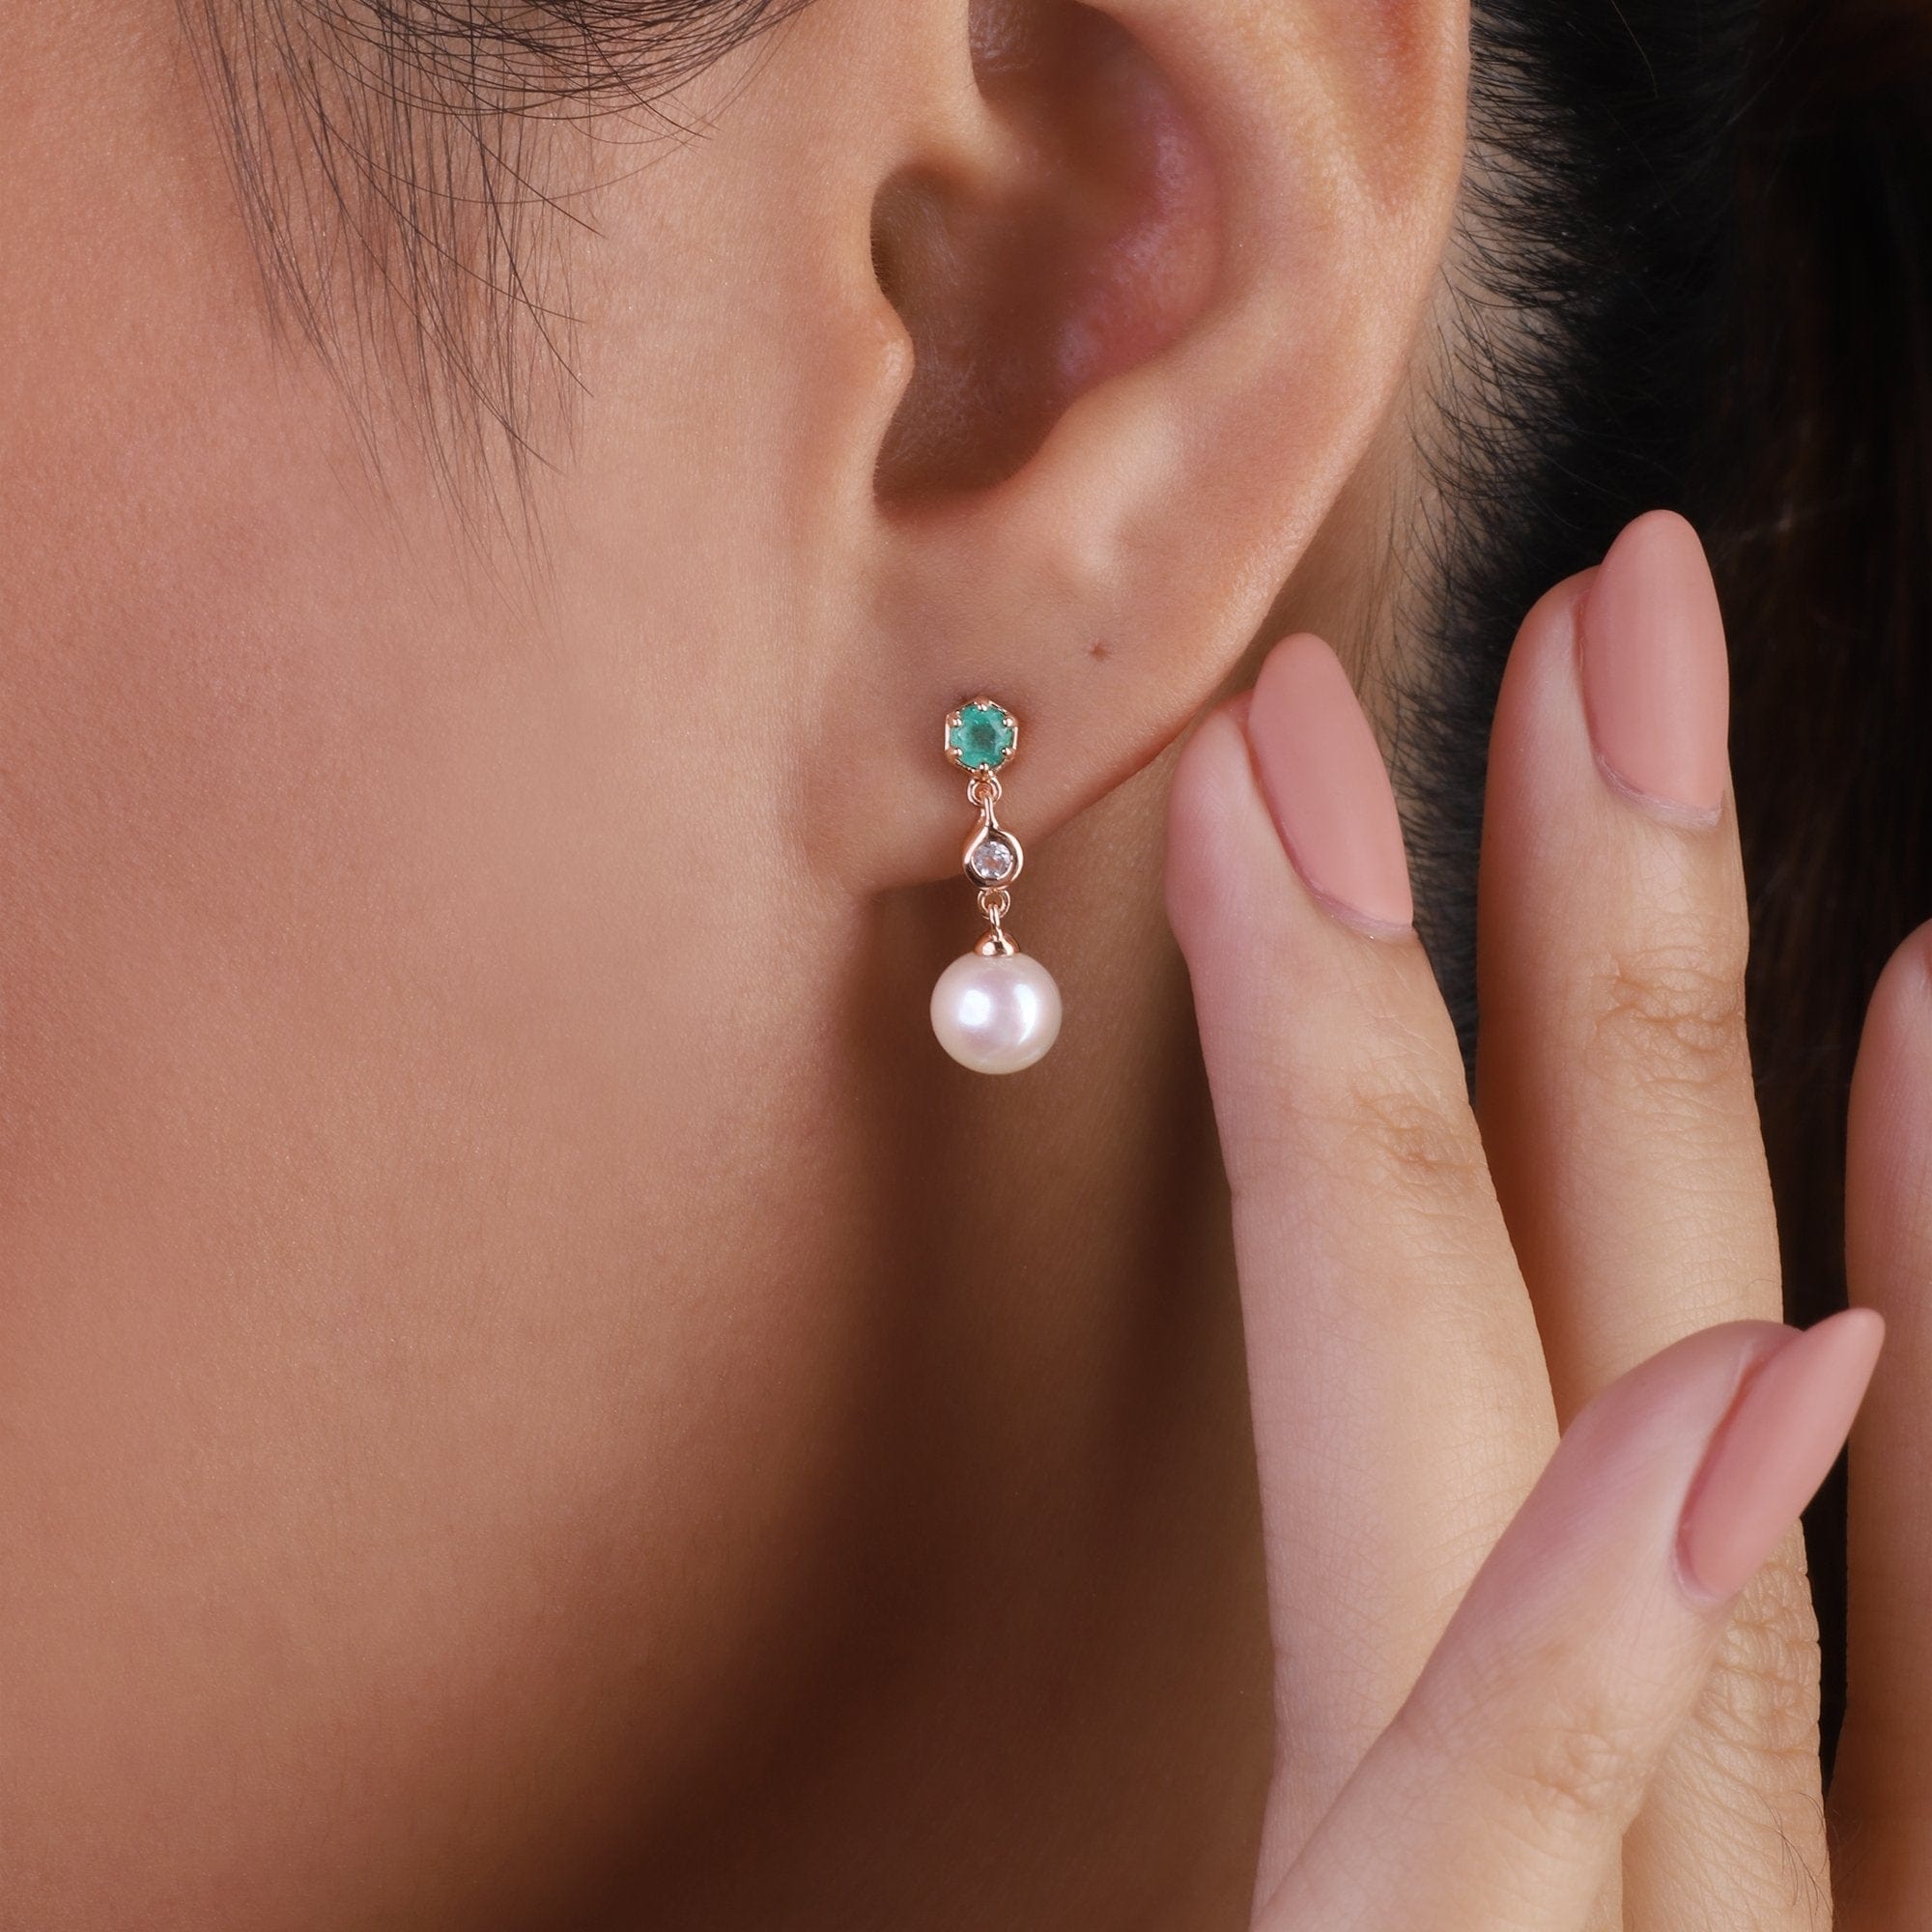 Modern Pearl, Emerald & Topaz Mismatched Drop Earrings in Rose Gold Plated Sterling Silver on model